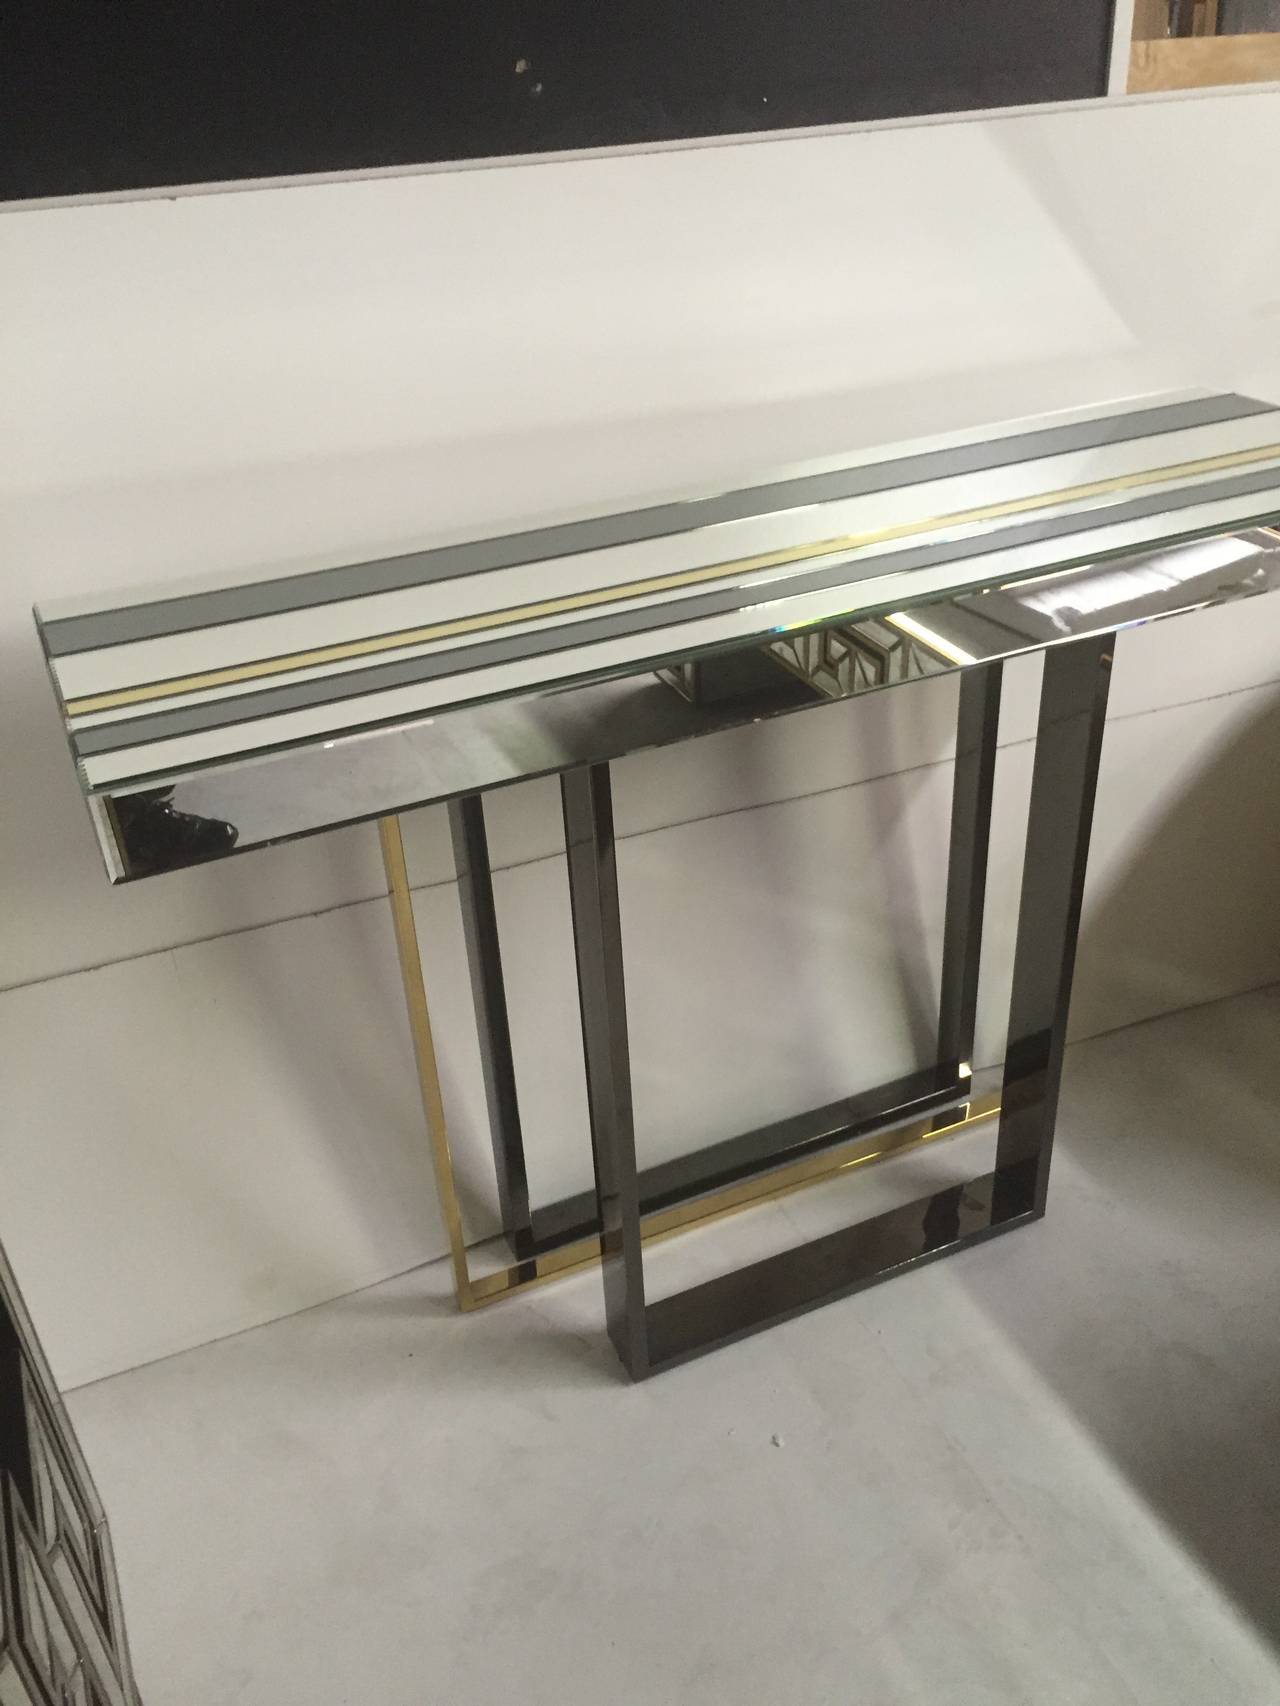 A two tone chrome and gold tone framed mirrored console designed in the manner of Milo Baughman's Stylish glass and tubular furniture.